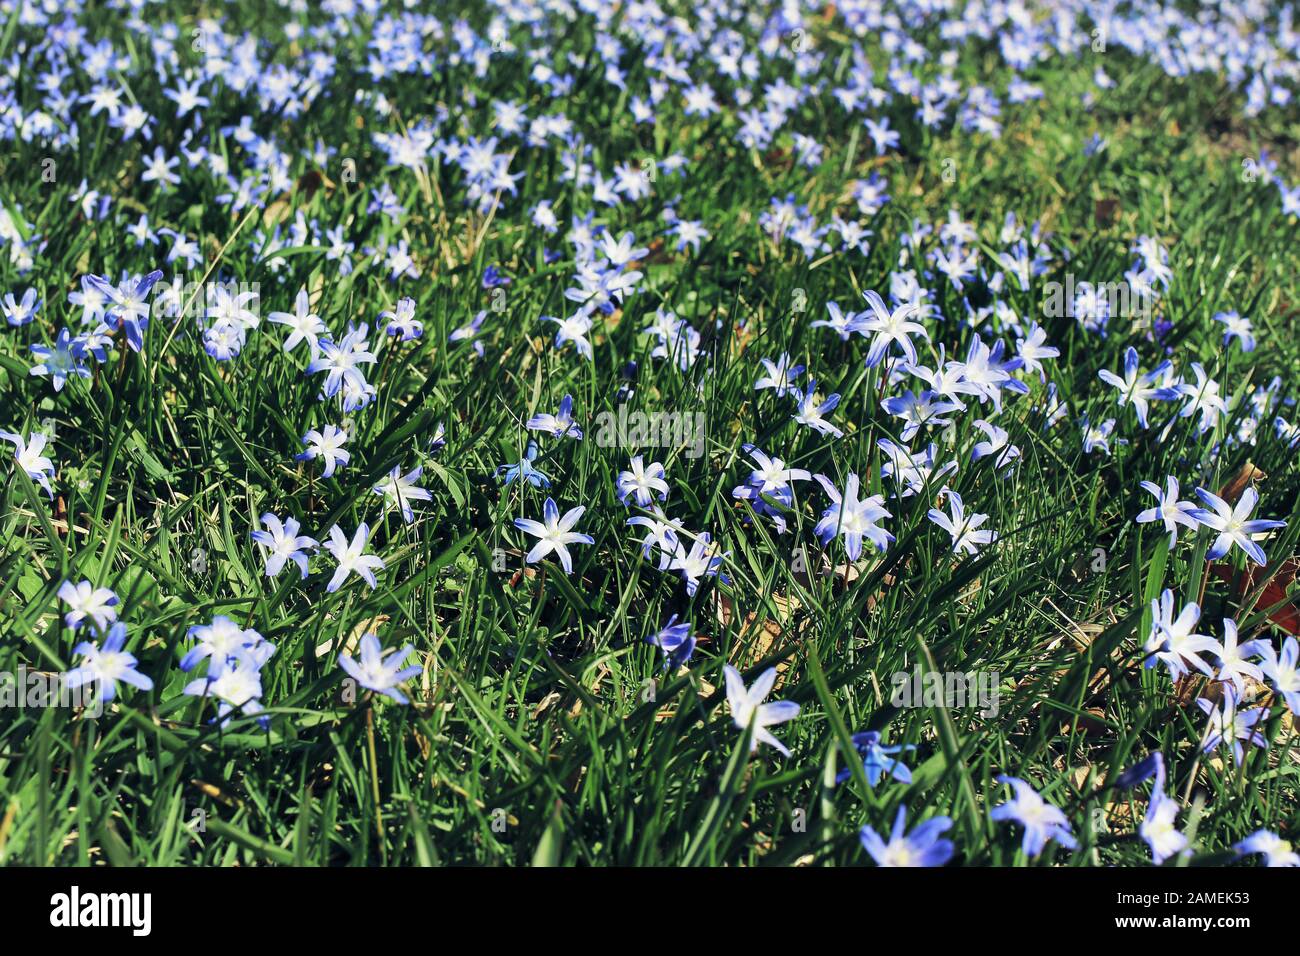 Closeup of blooming blue scilla luciliae flowers in sunny day. First spring bulbous plants. Floral meadow ground cover, carpet. Chionodoxa blossoms am Stock Photo